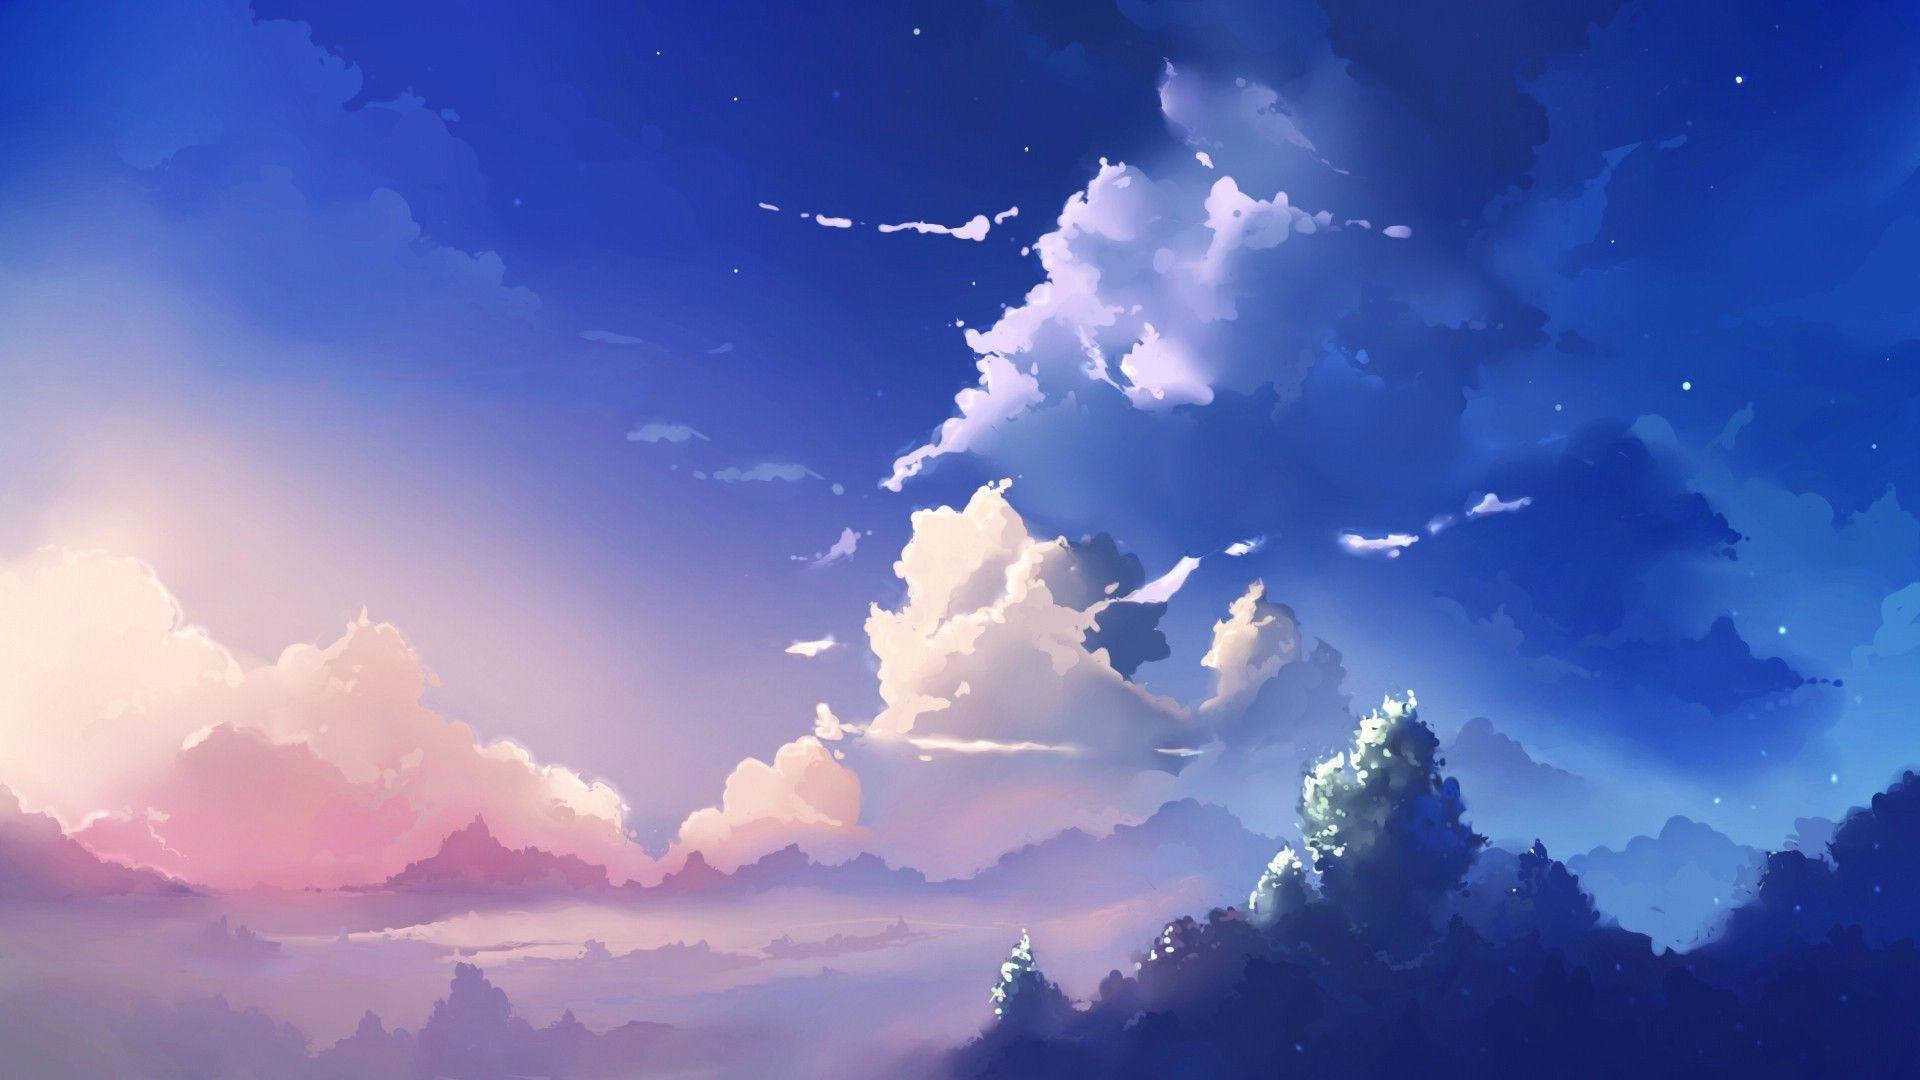 Dark Anime backgrounds Scenery ·① Download free stunning wallpapers